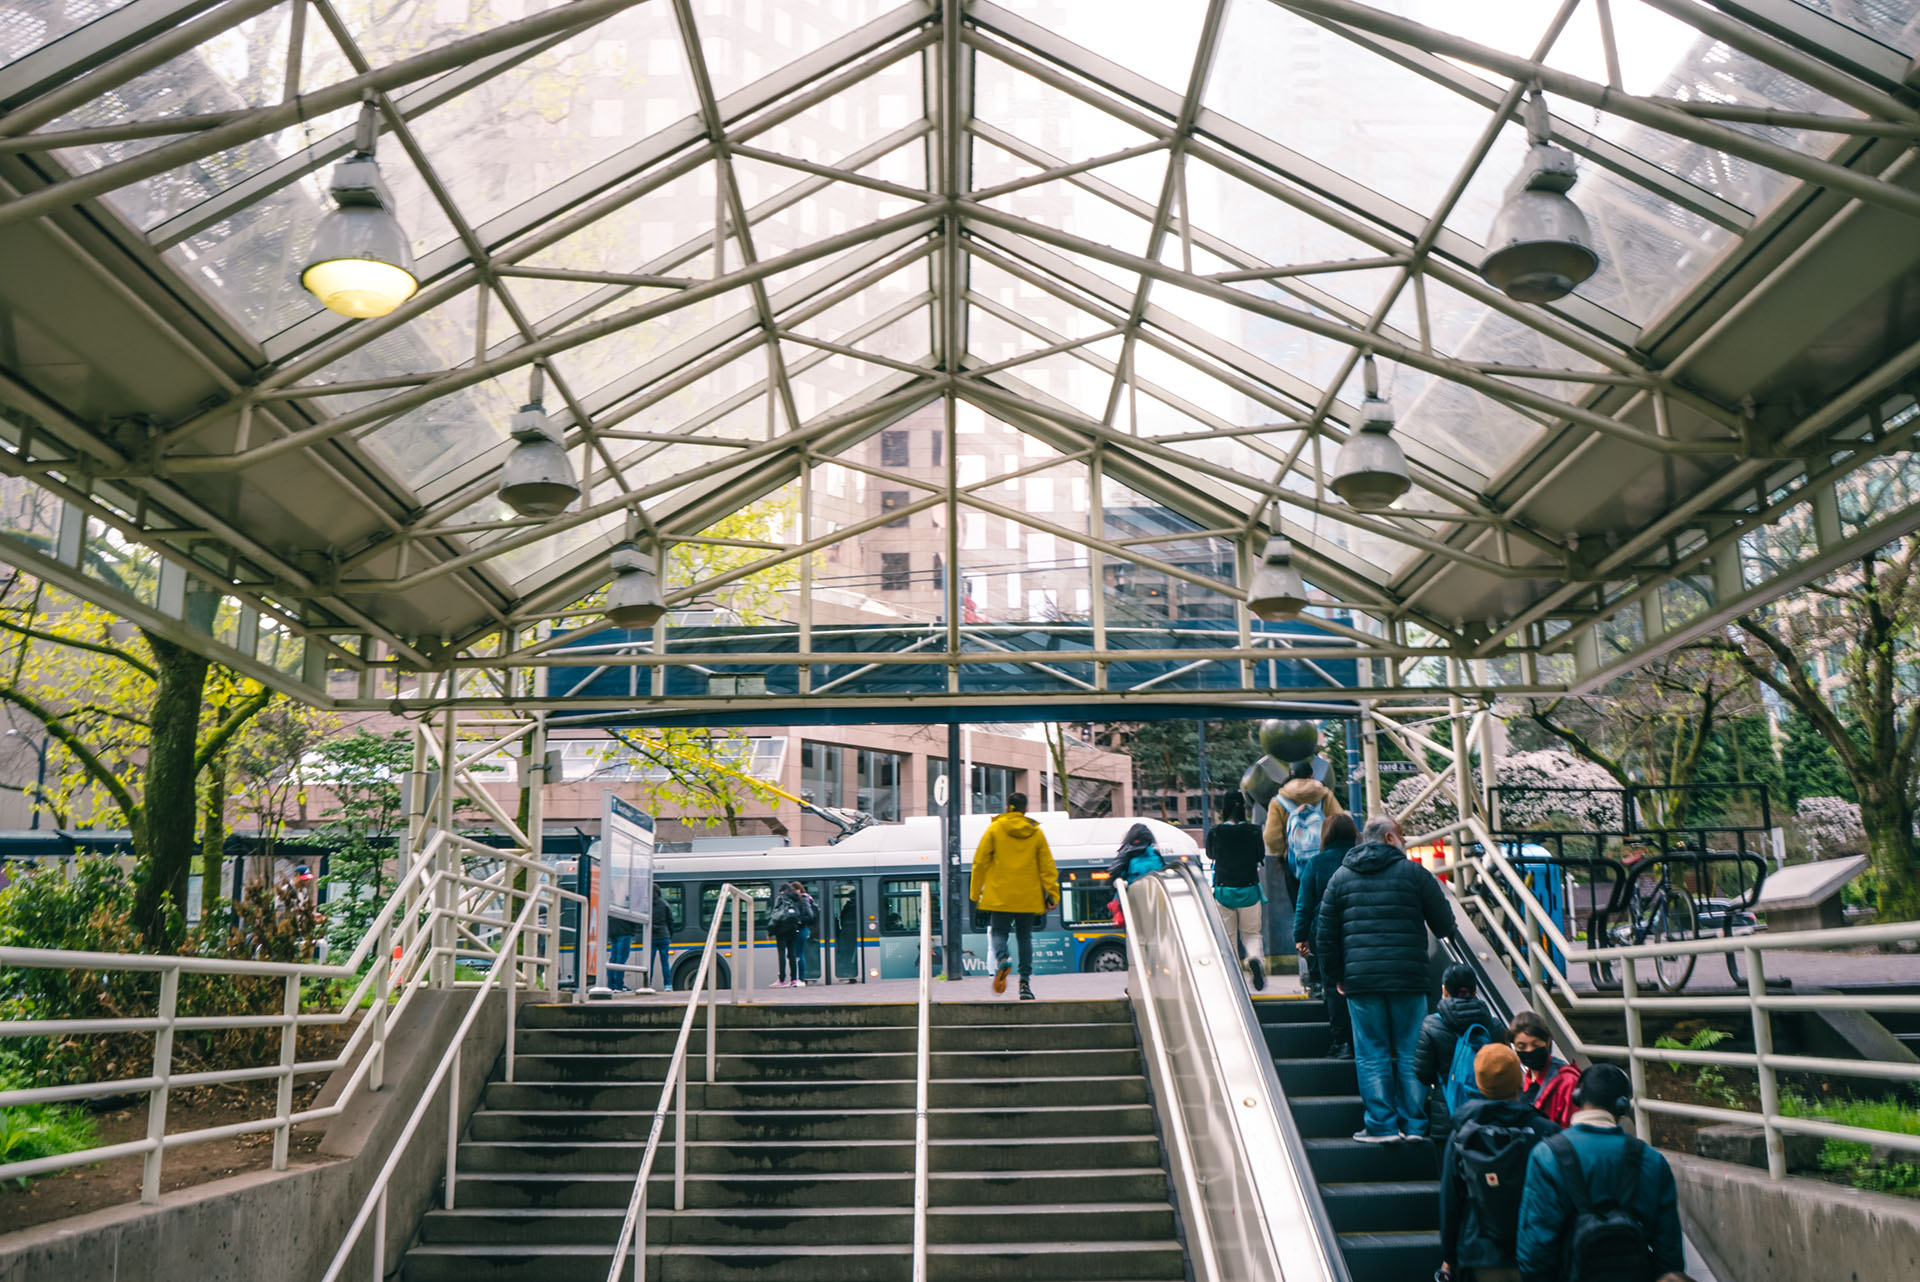 The escalators and stairs to street level at Burrard Station